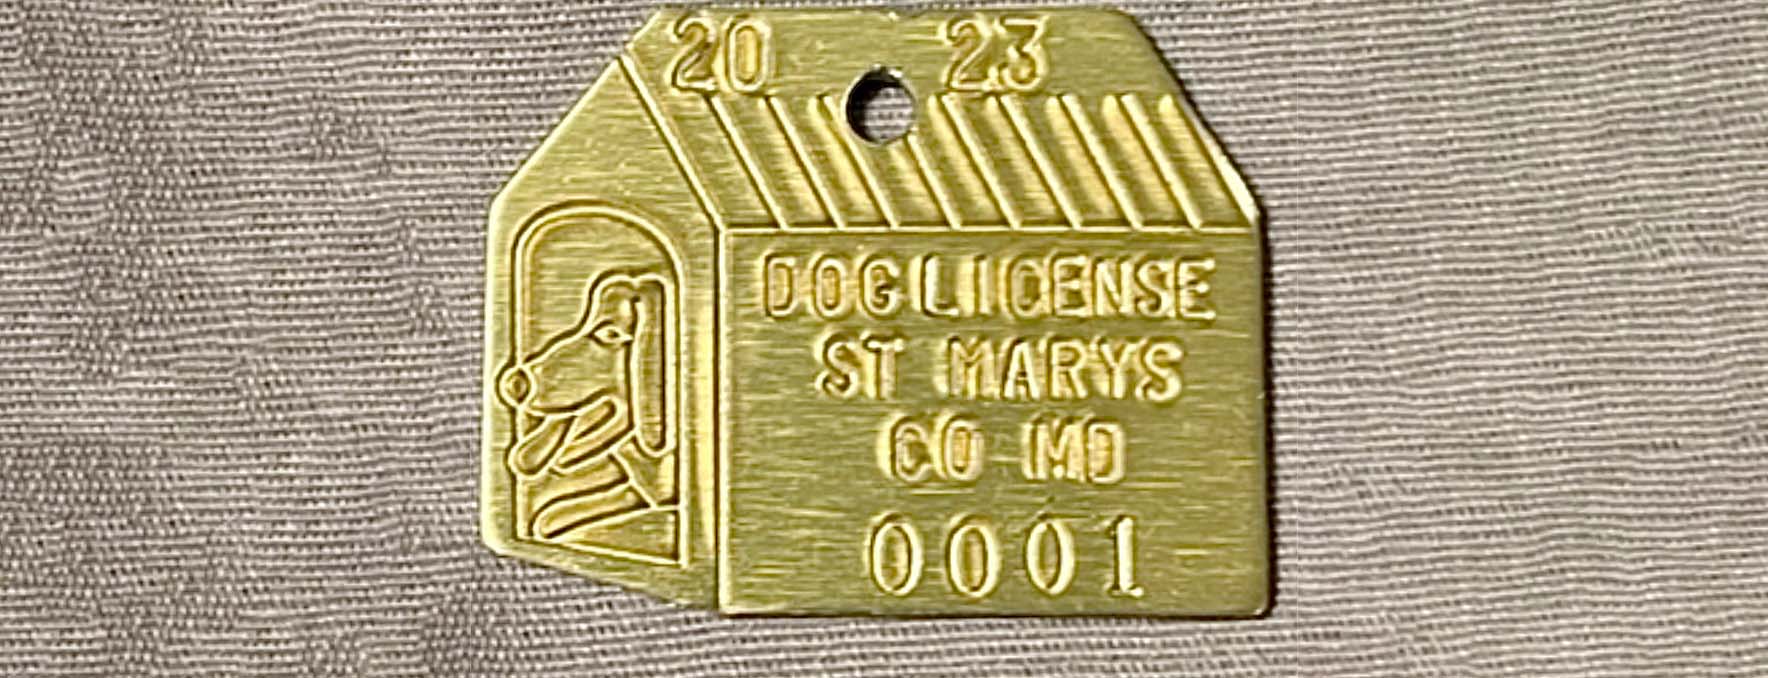 A St. Mary's County dog license tag. Made of metal (brass color) and in the shape of a dog house, the year and the license number are engraved in it.